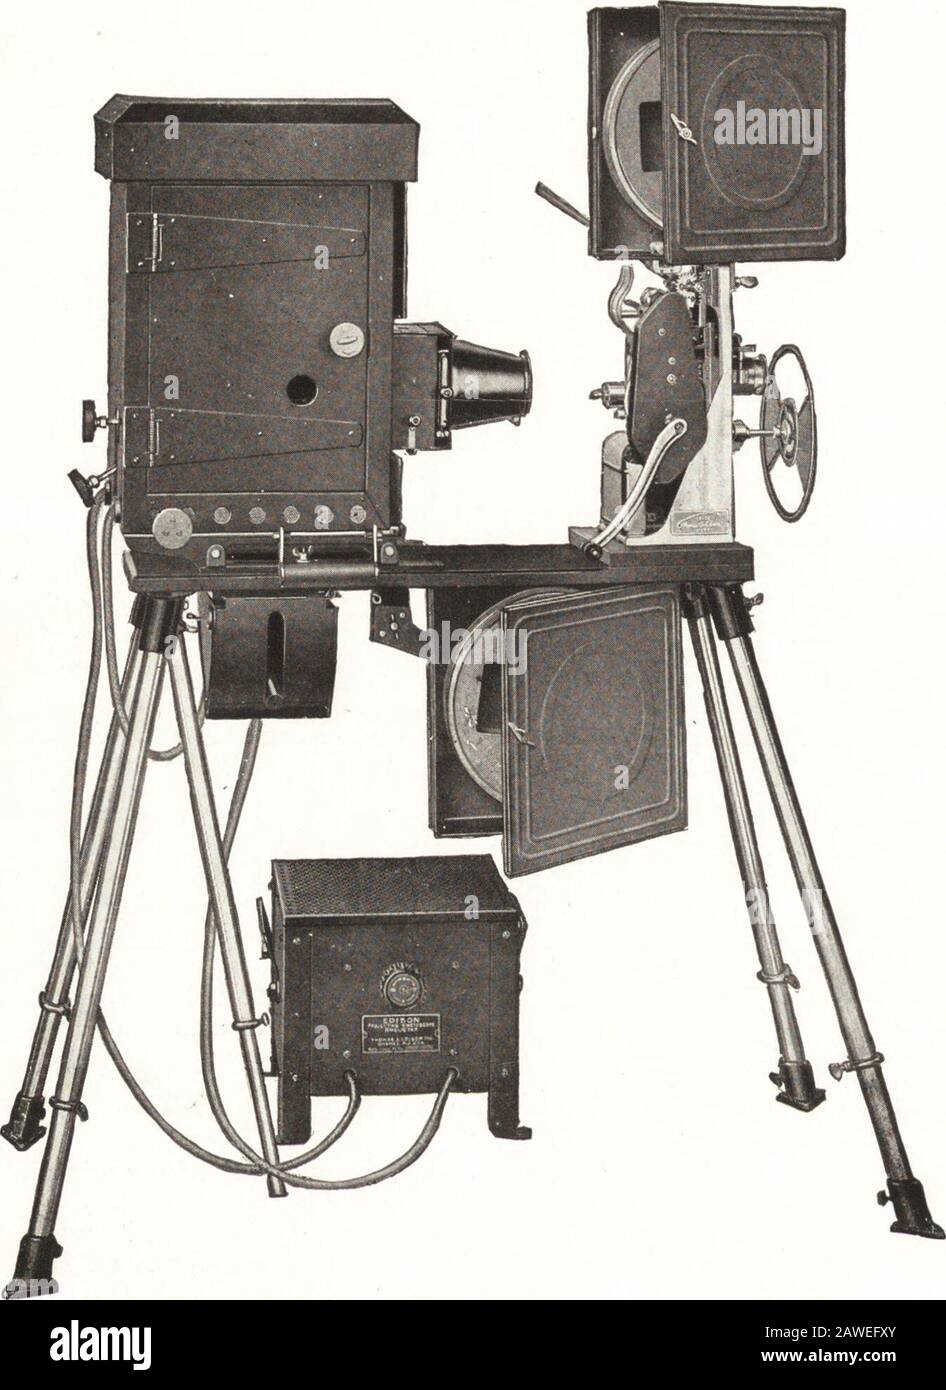 Catalog of stereopticons, motion picture machines, projection apparatus : manufactured and imported by the McIntosh Stereopticon Company . ES. The use of motion jMctures is becoming so increasinglypopular in every line of educational, religious and generalprojection as well as for purely amusement purposes that wehave made a careful study of the motion picture situation andhave selected two machines to recommend specifically to ourcustomers. These machines are the F.dison Type D Kinetoscopeand the Safety Film Projector. The Edison we believe to be equal if not superior to anymachine on the mar Stock Photo